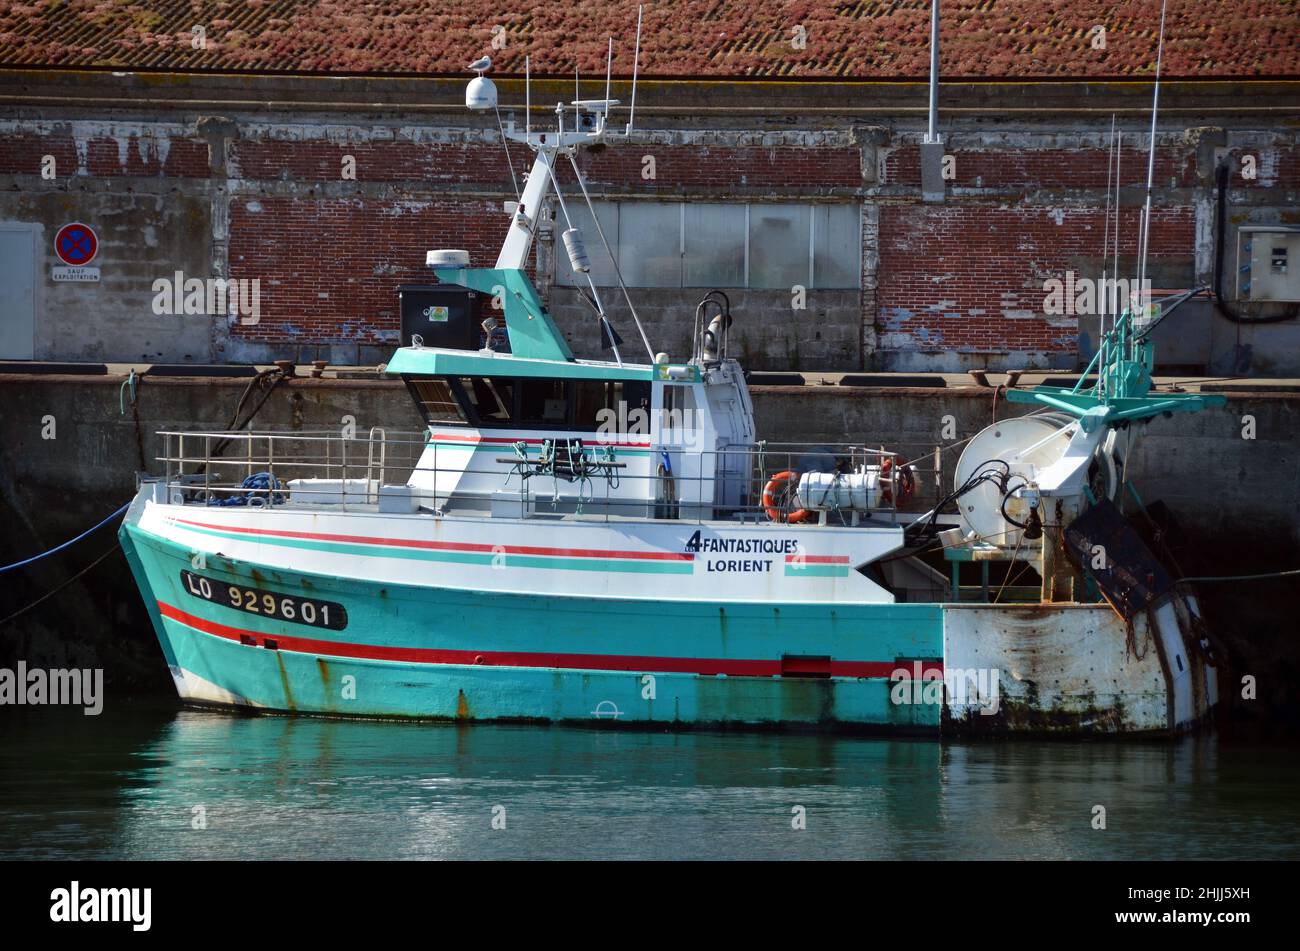 A trawler in the port of Lorient, Brittany. Lorient is the secong french fishing port after Boulogne sur mer in northern France. Stock Photo